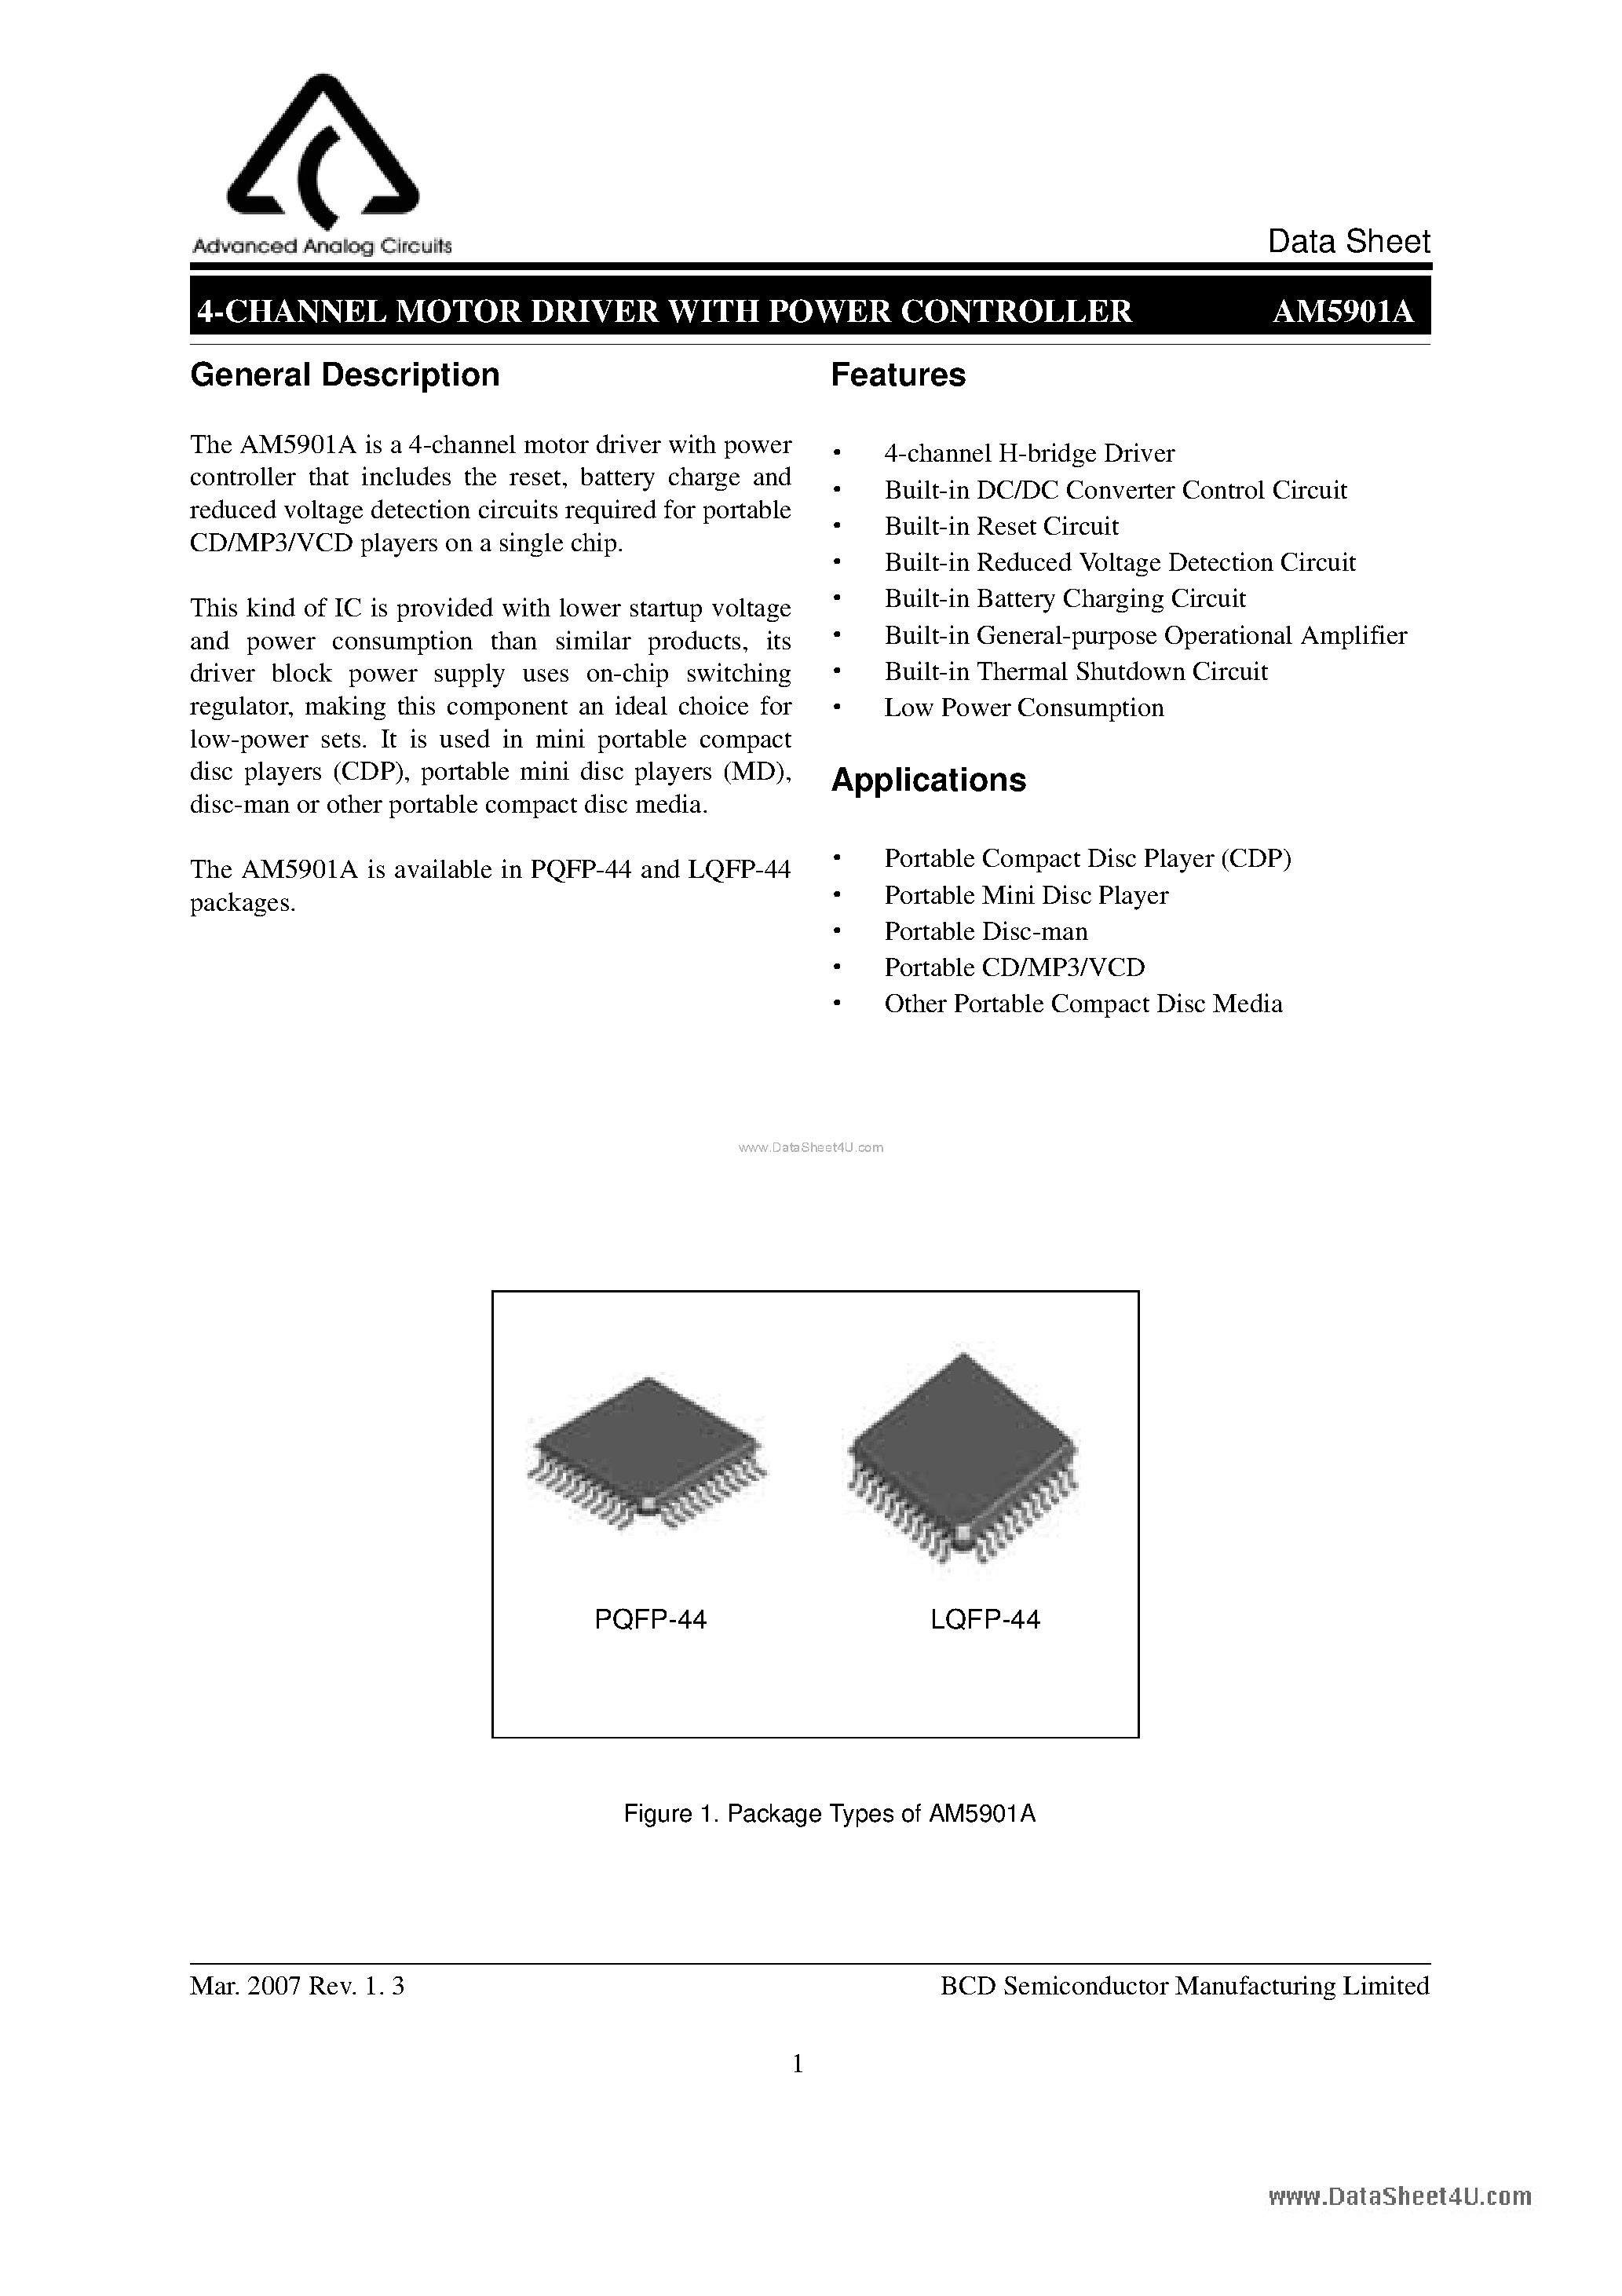 Datasheet AM5901A - 4-CHANNEL MOTOR DRIVER page 1